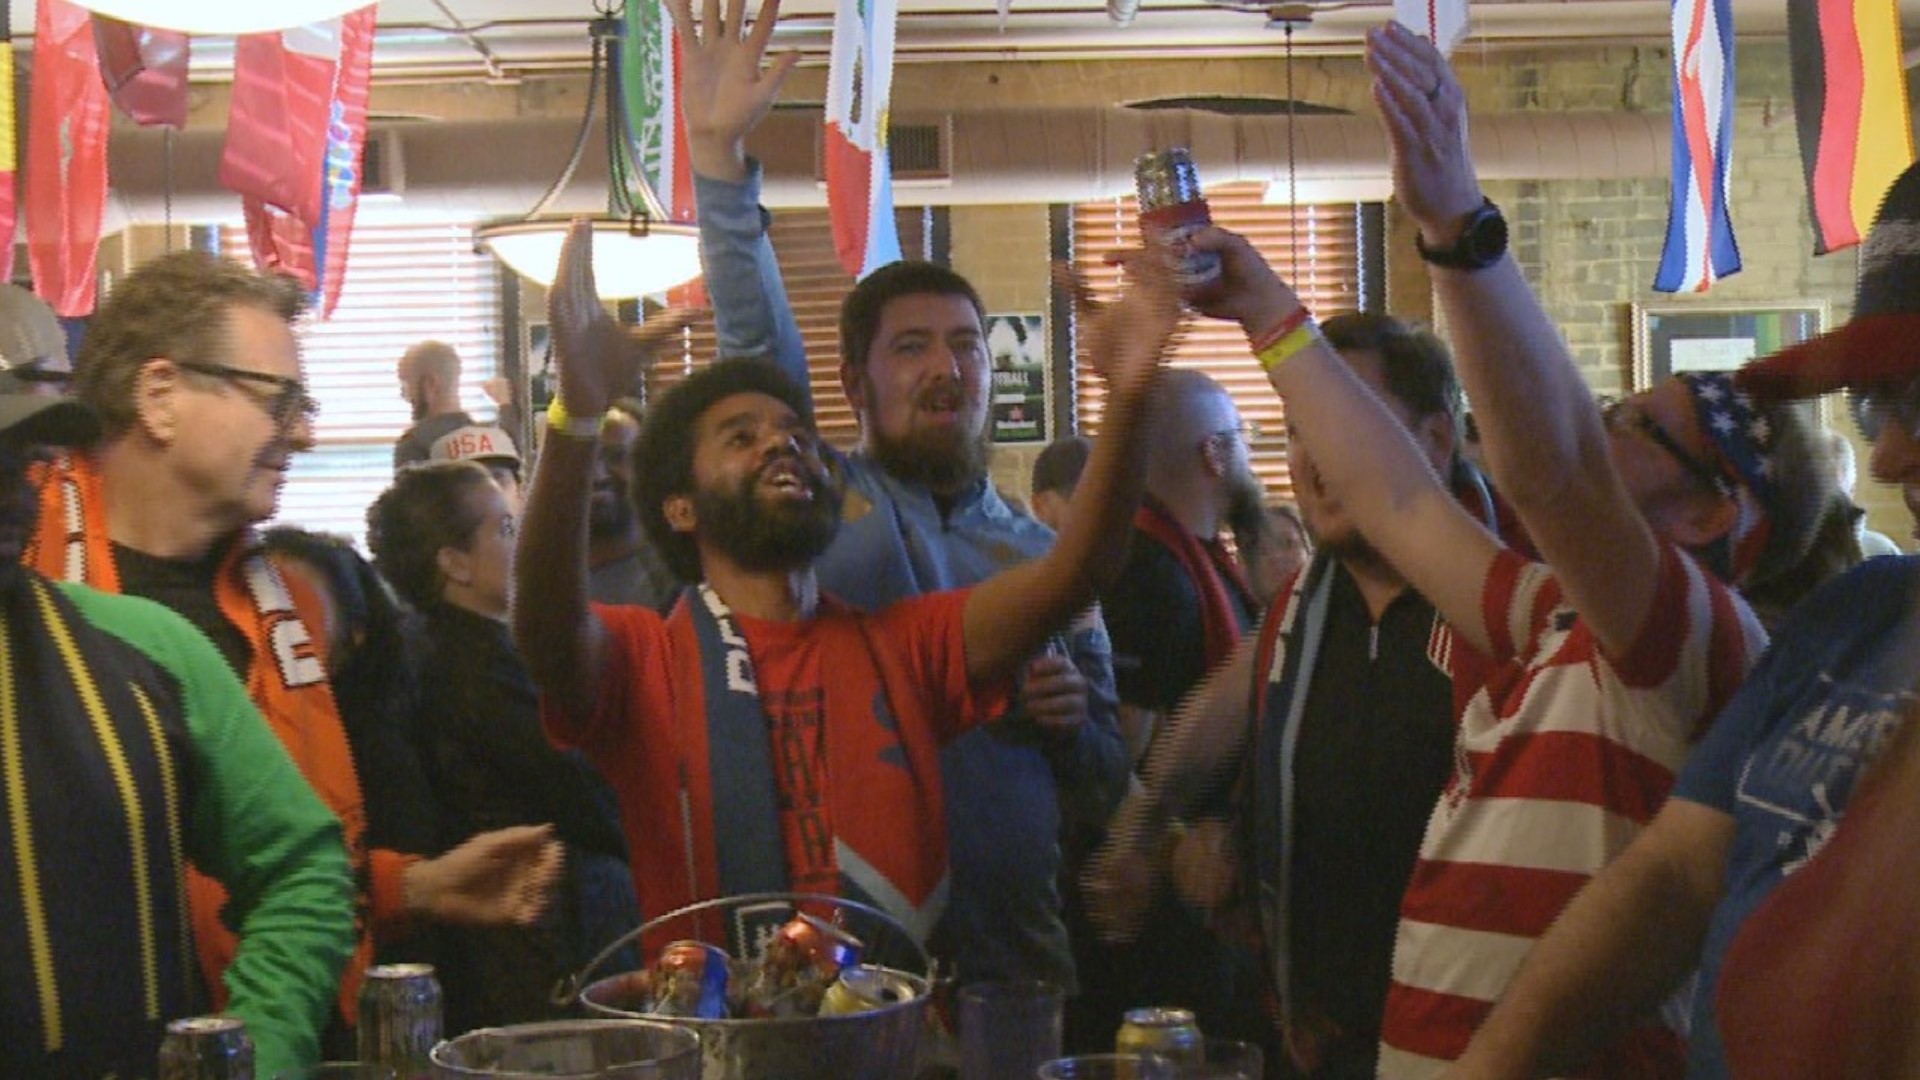 This is a worldwide community Fans pour into SpeakEZ Lounge as the US takes on England in World Cup wzzm13